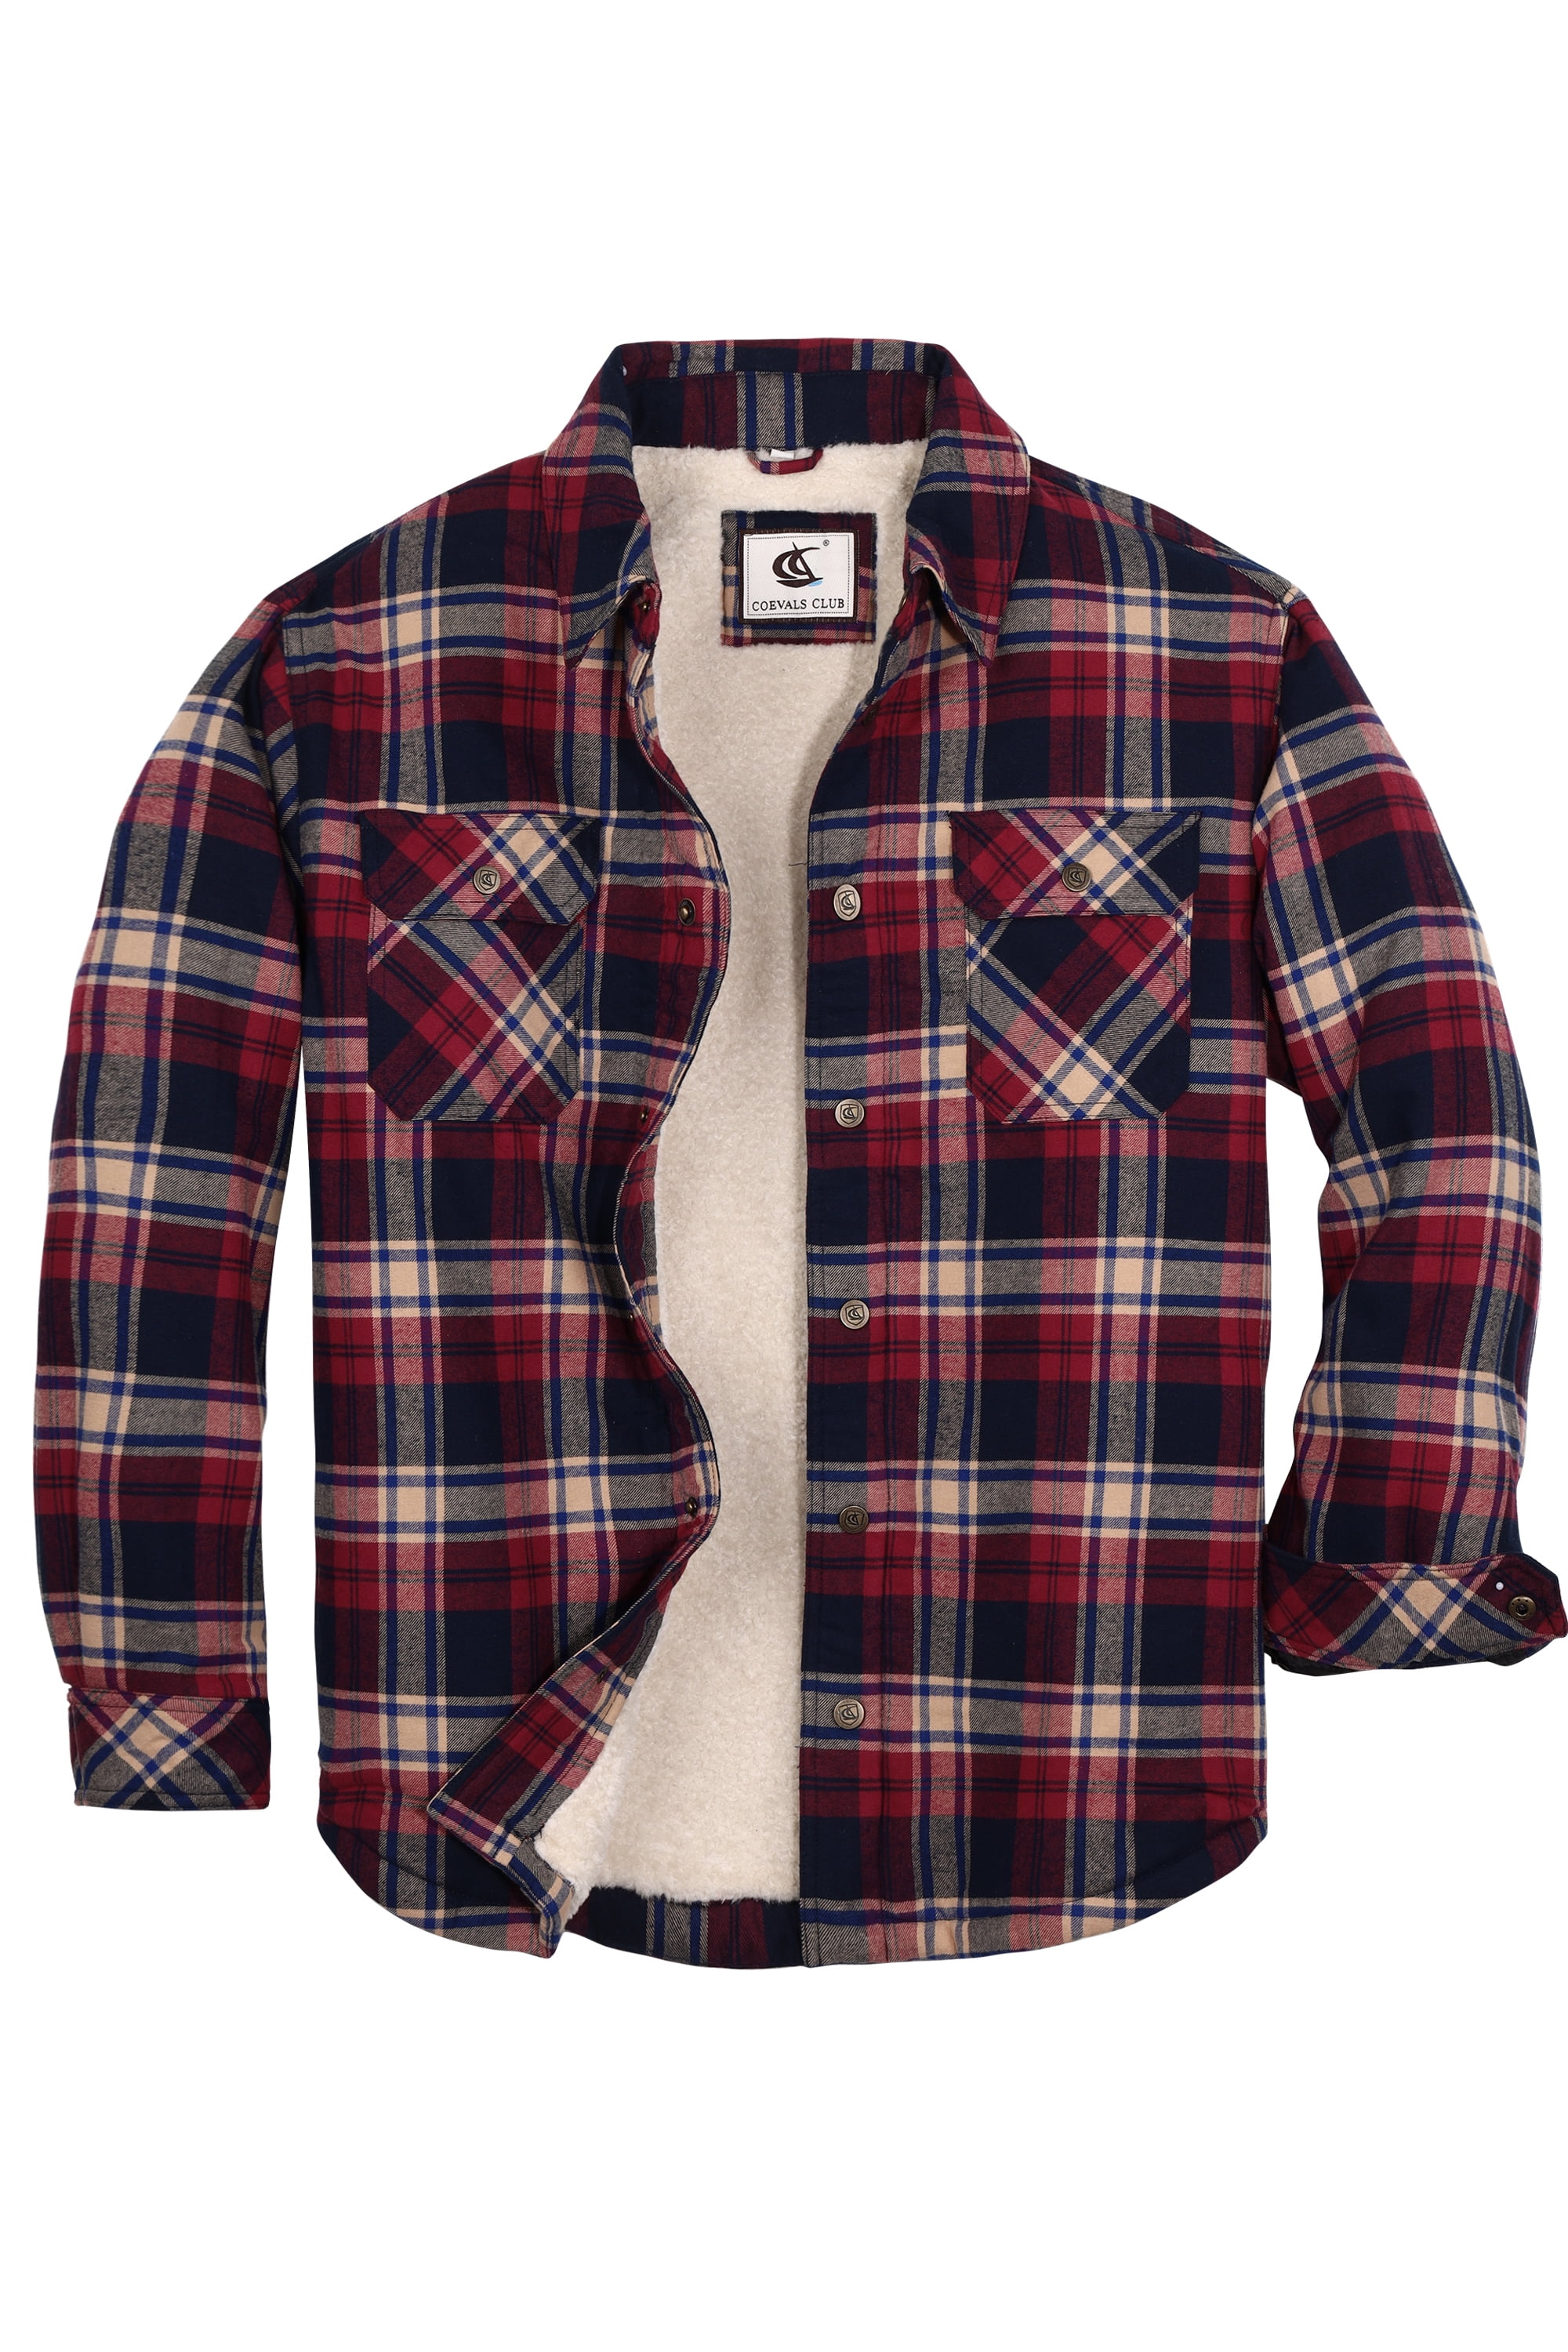 COEVALS CLUB Men's Sherpa Lined Flannel Long Sleeve Cotton Plaid Snap ...